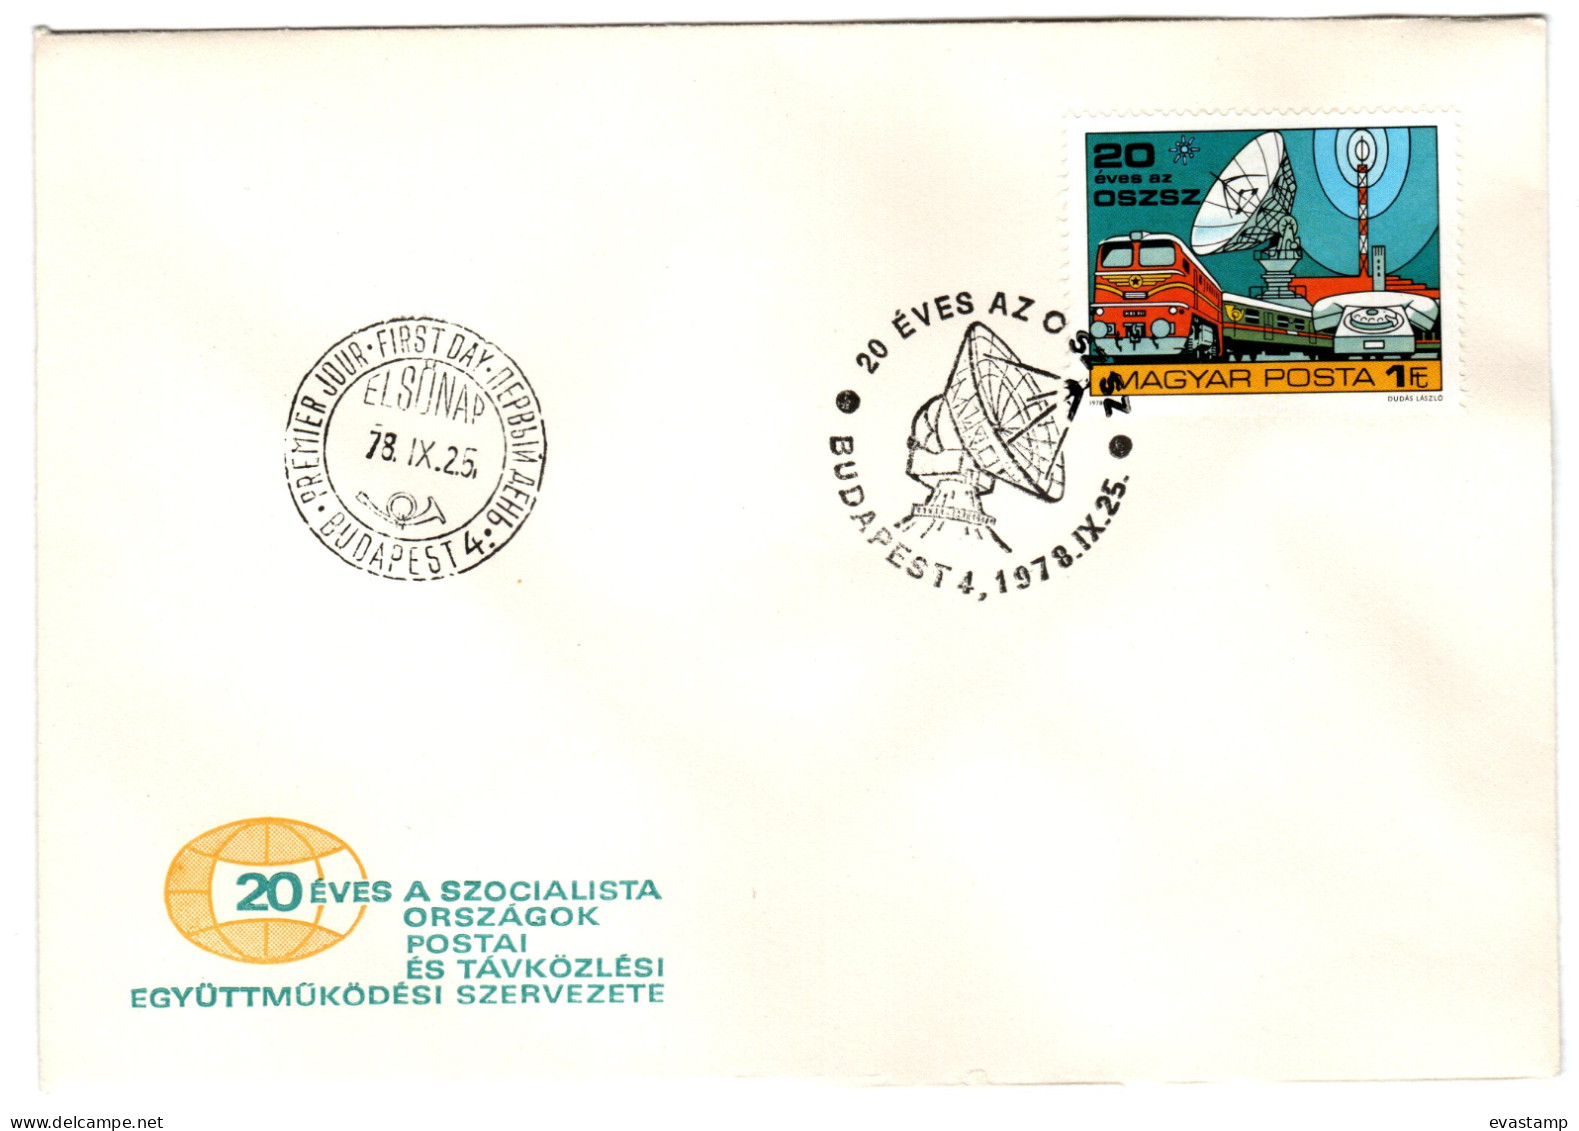 HUNGARY - 1978. FDC - Organization For Communication Cooperation Of Socialist Countries MNH! Mi:3315. - FDC